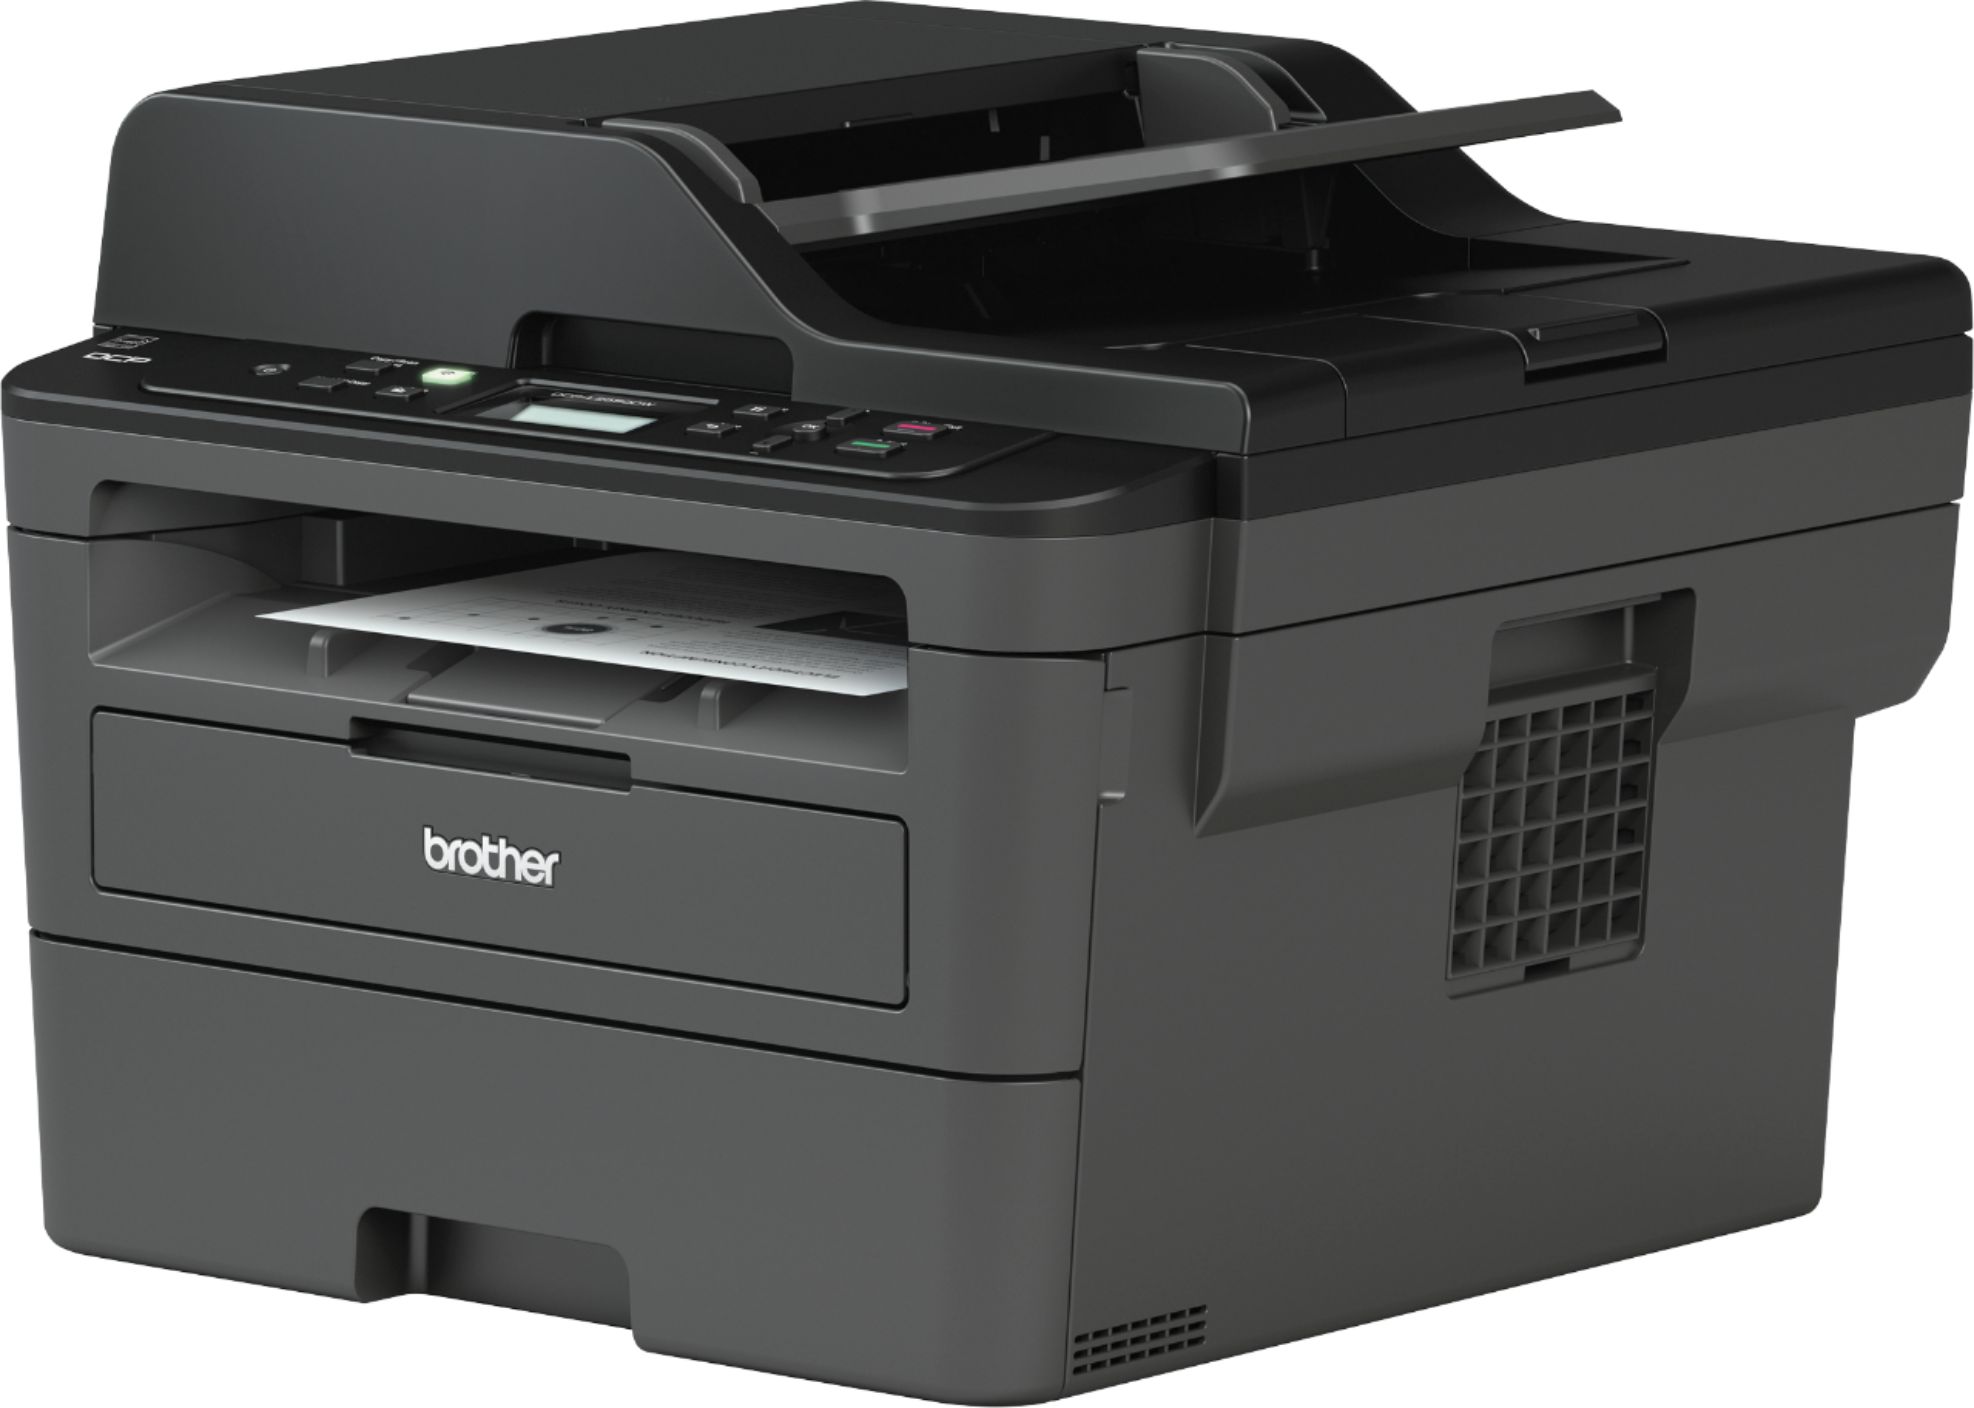 Left View: Canon - imageCLASS MF236n Black-and-White All-In-One Laser Printer - Black